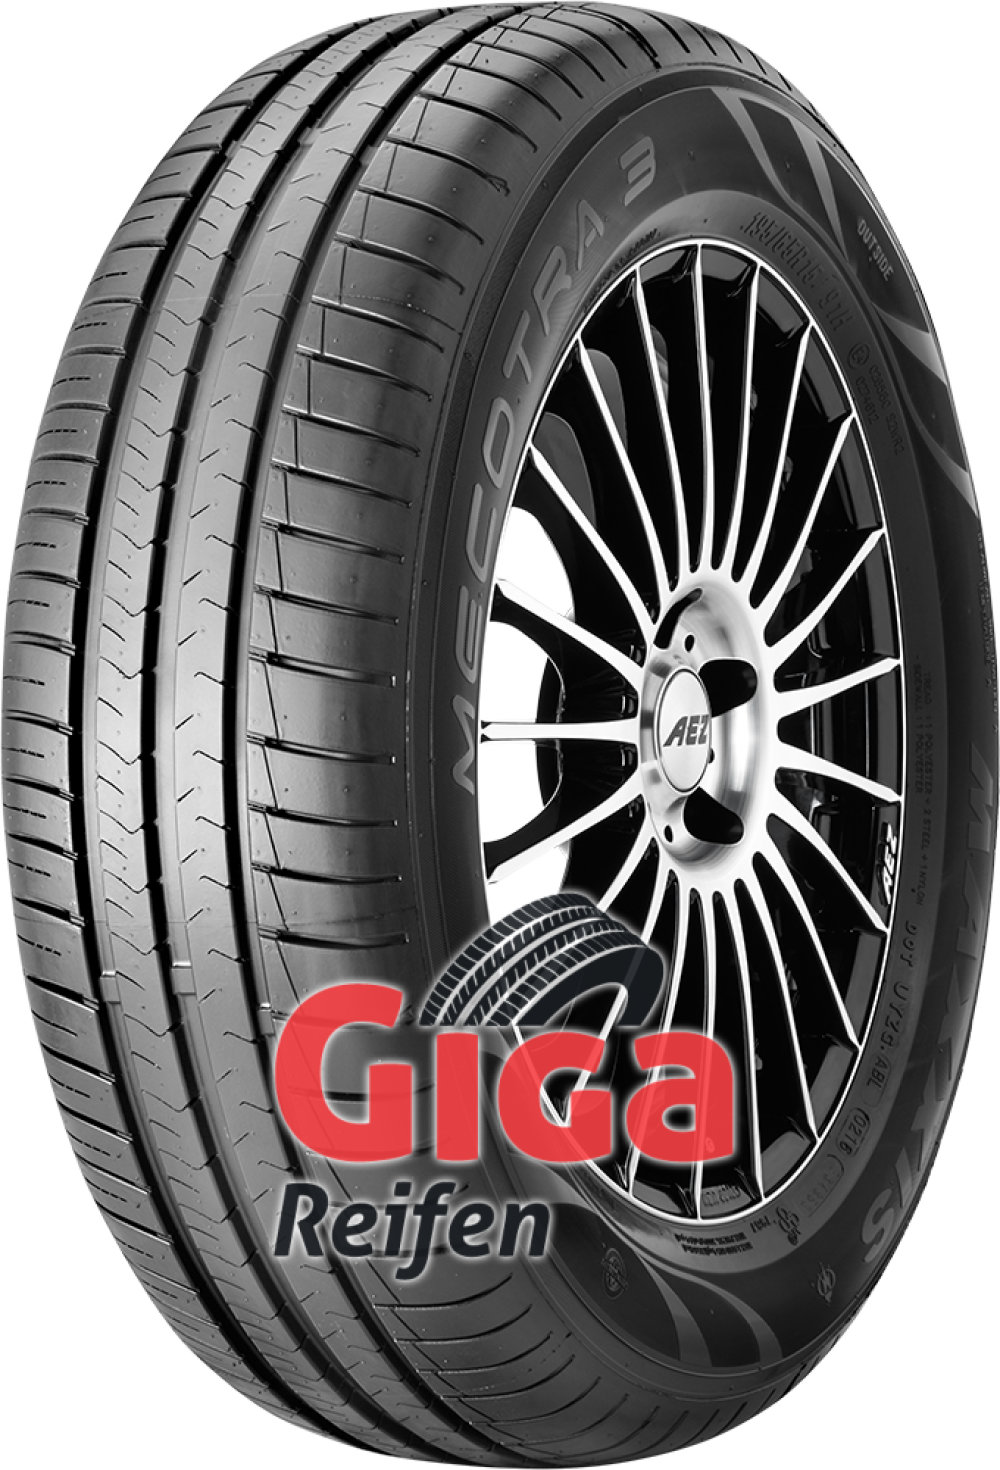 Maxxis Mecotra 3 ( 175/60 R14 79H ) von Maxxis